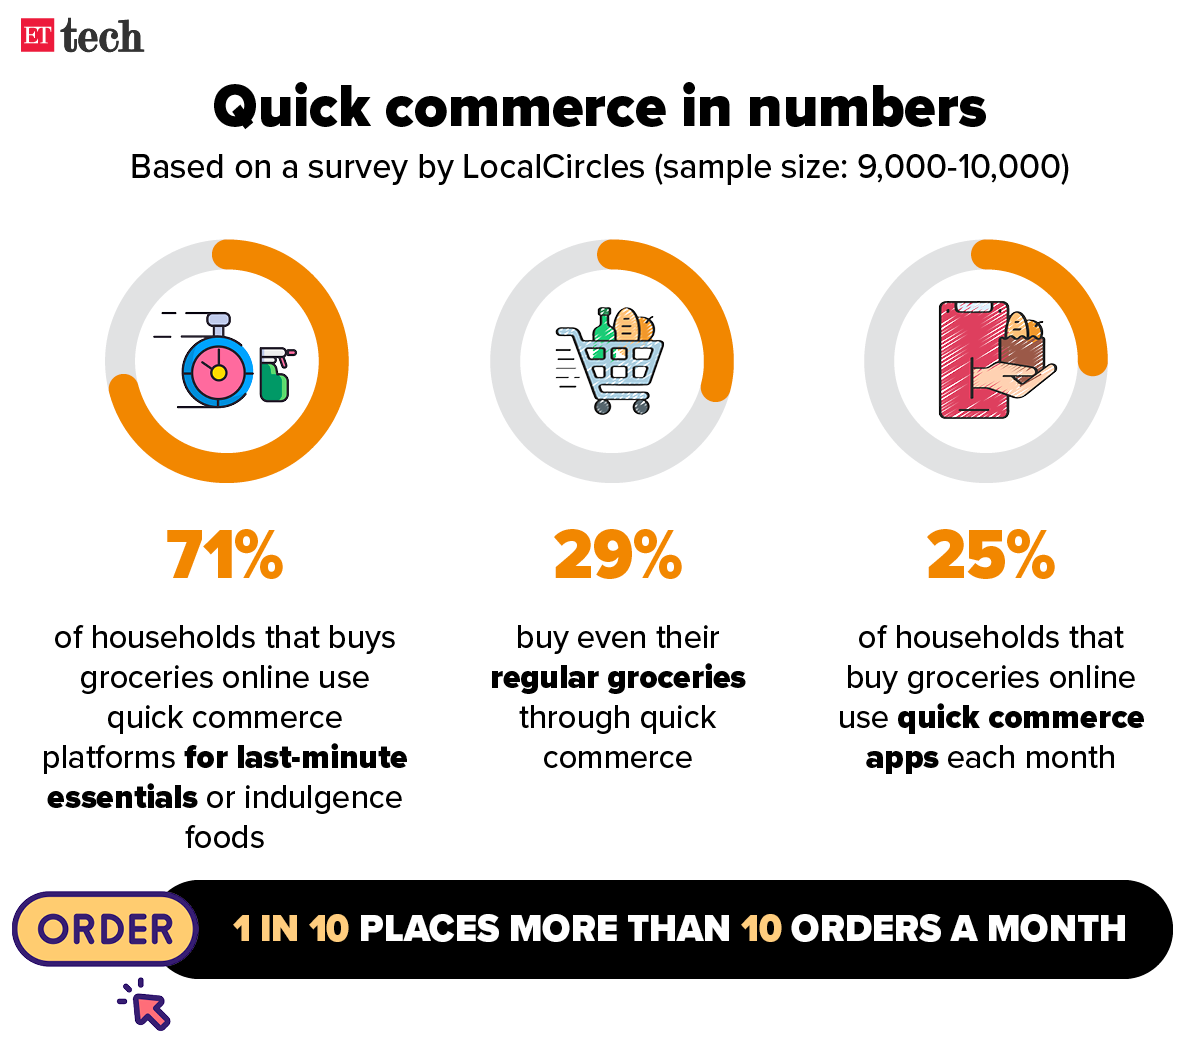 Quick commerce in numbers